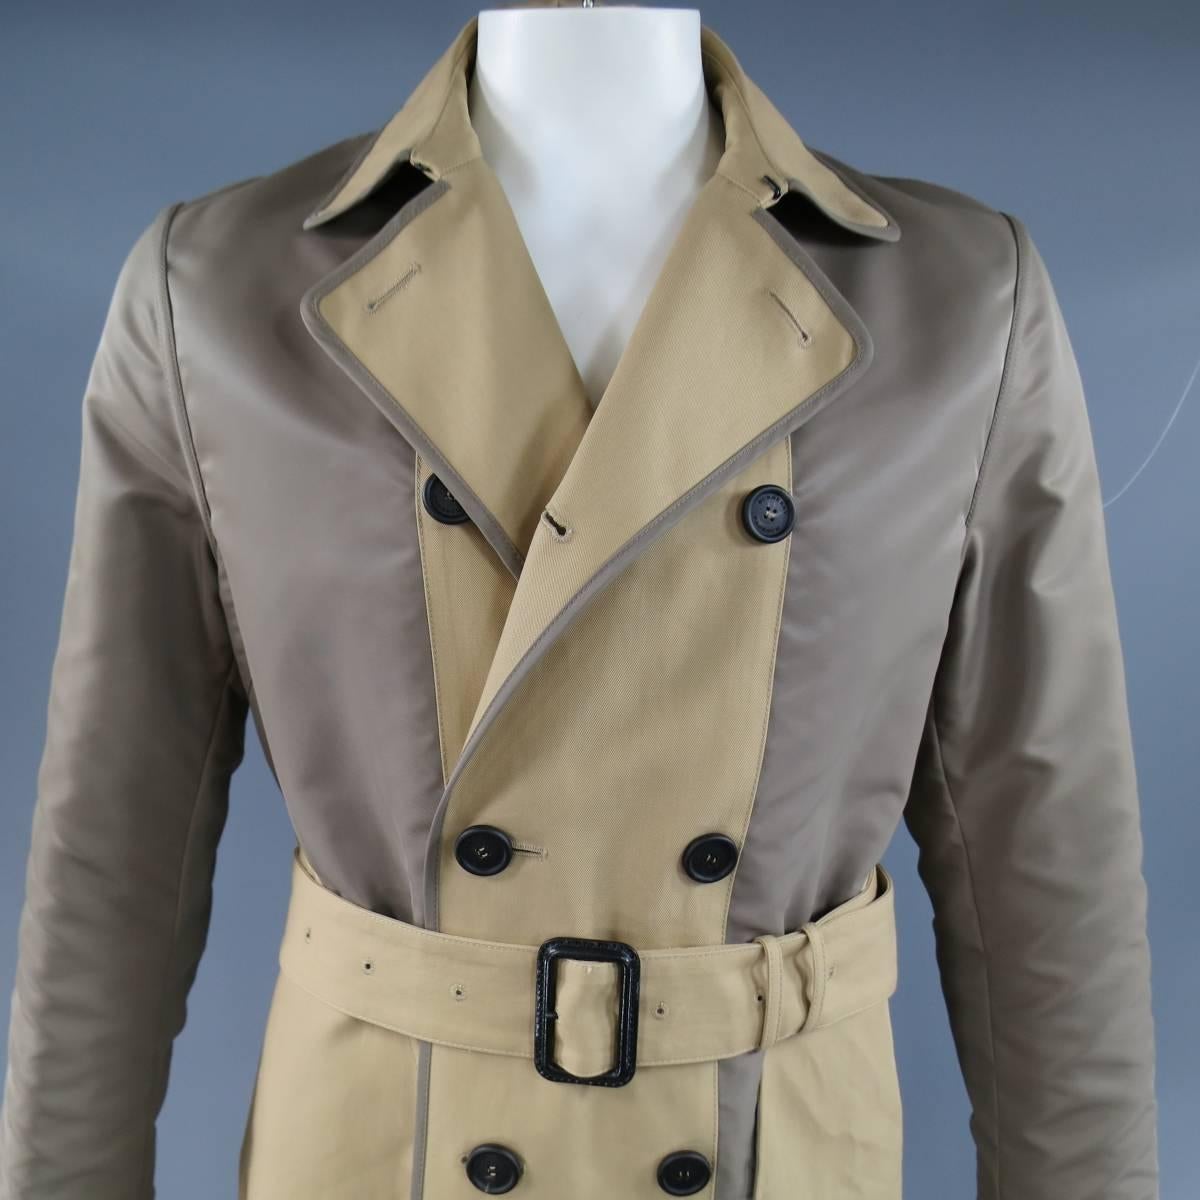 Modern double breasted trench coat by BURBERRY PRORSUM comes in a two tone, color block, classic tan khaki coated cotton twill with taupe nylon panels and can be worn inside out as a classic solid beige trench with taupe piping. Made in